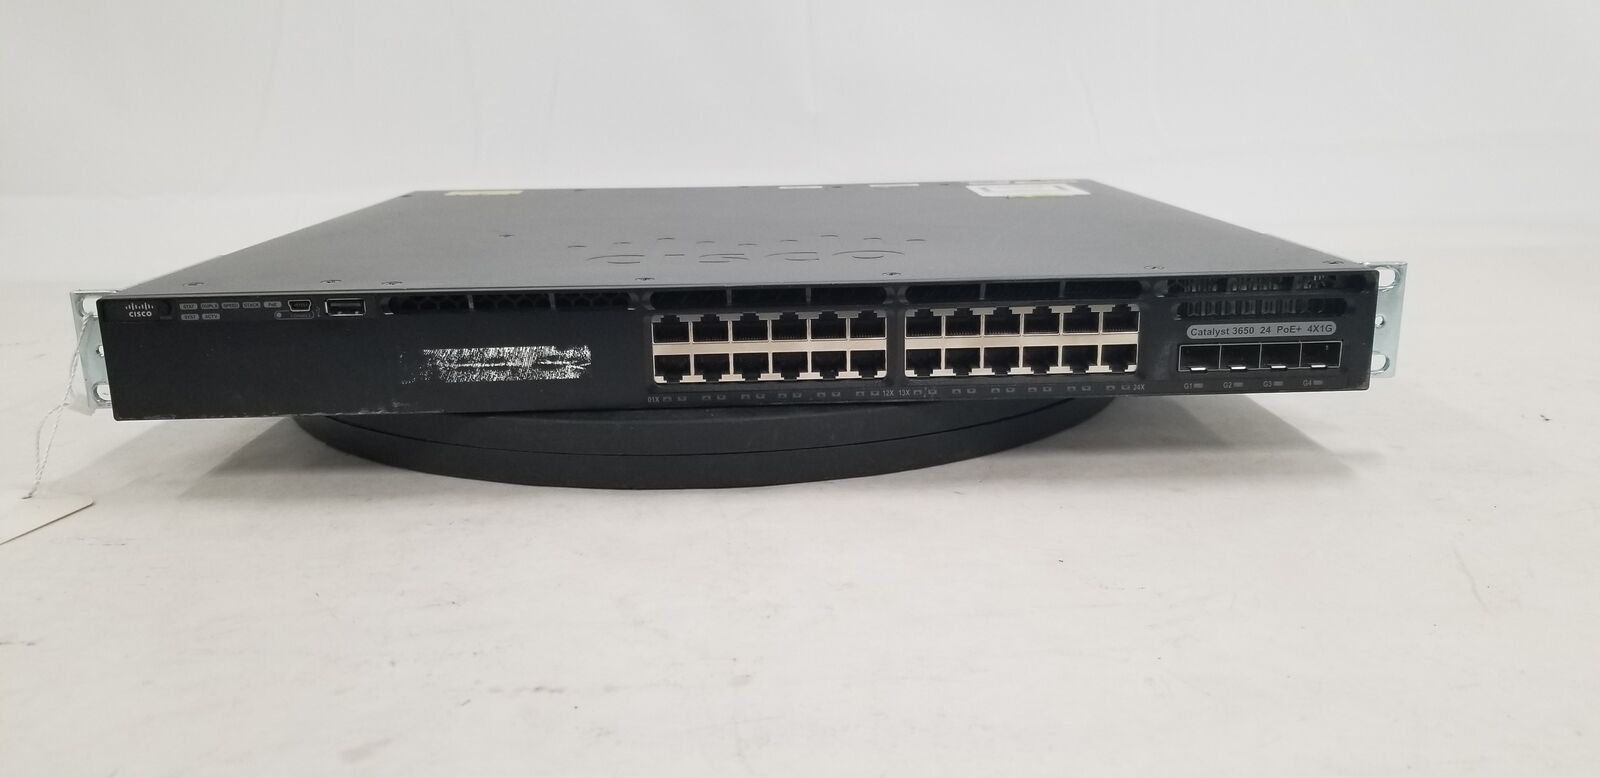 Lot of 2 Cisco Catalyst 3650 24-Port PoE+ 4x1G SFP+ Switches WS-C3650-24PS-S V04